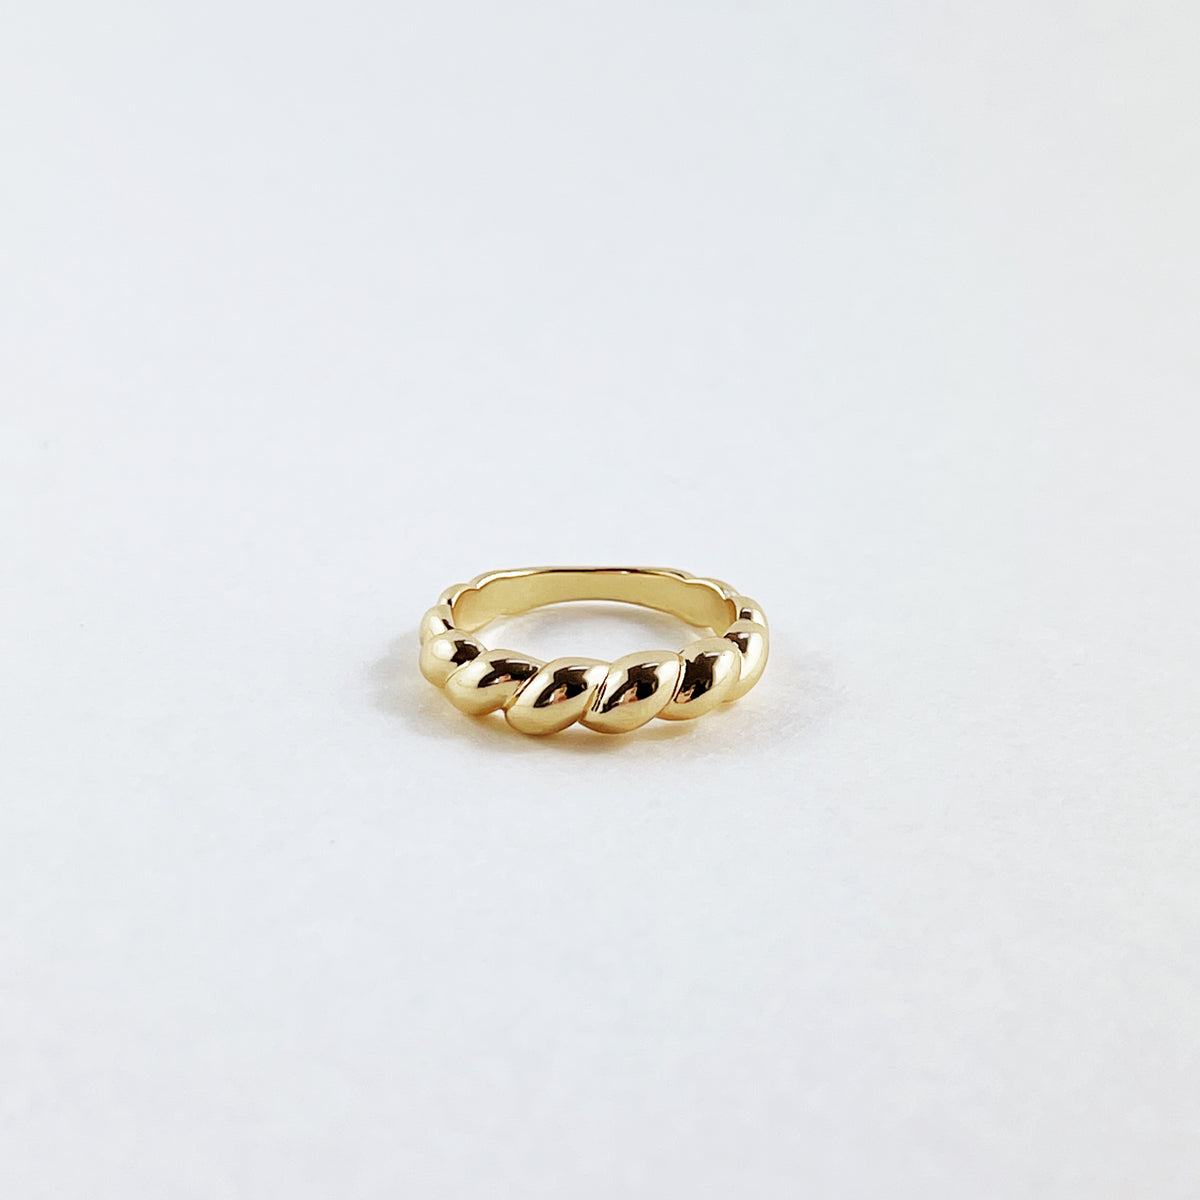 “Twister” Croissant Ring